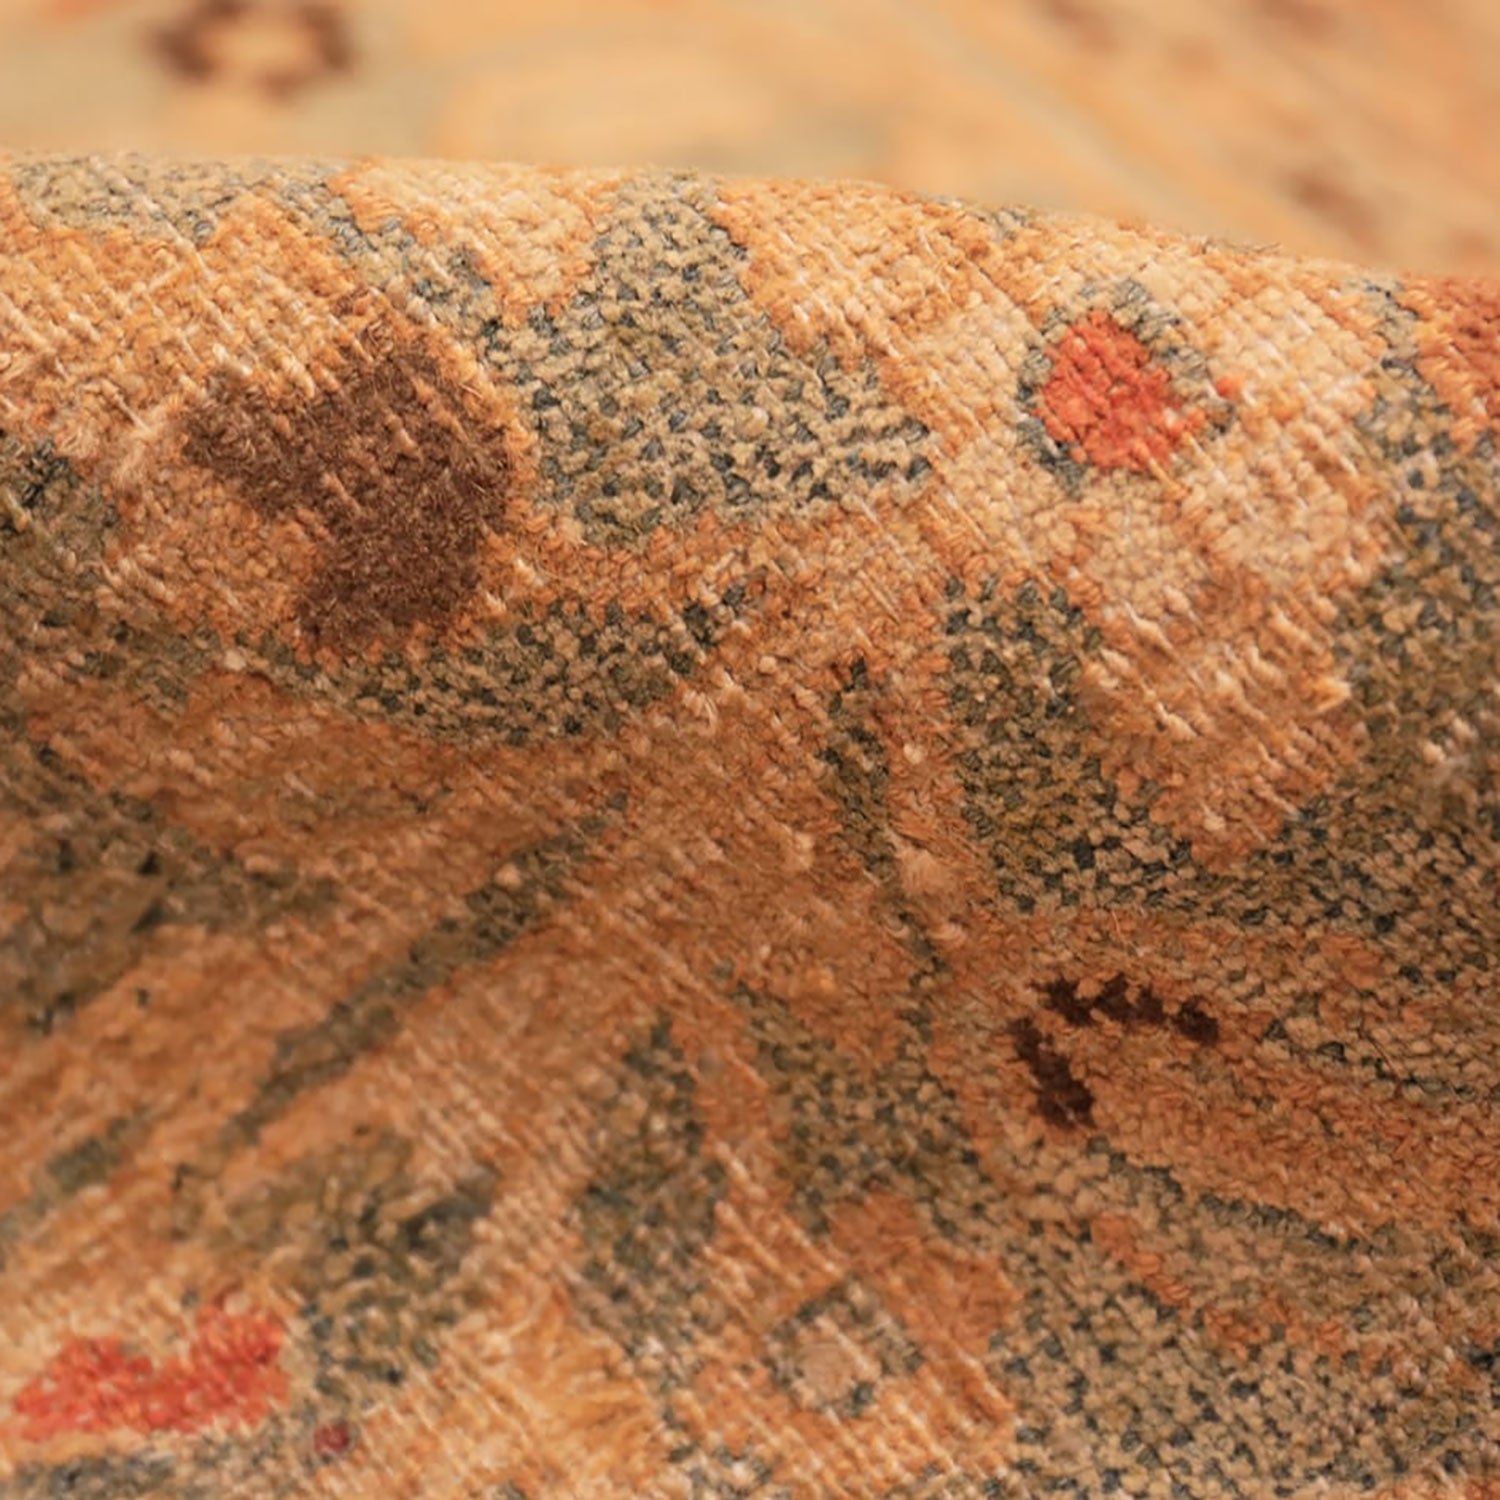 Close-up of textured fabric with intricate pattern in earthy tones.